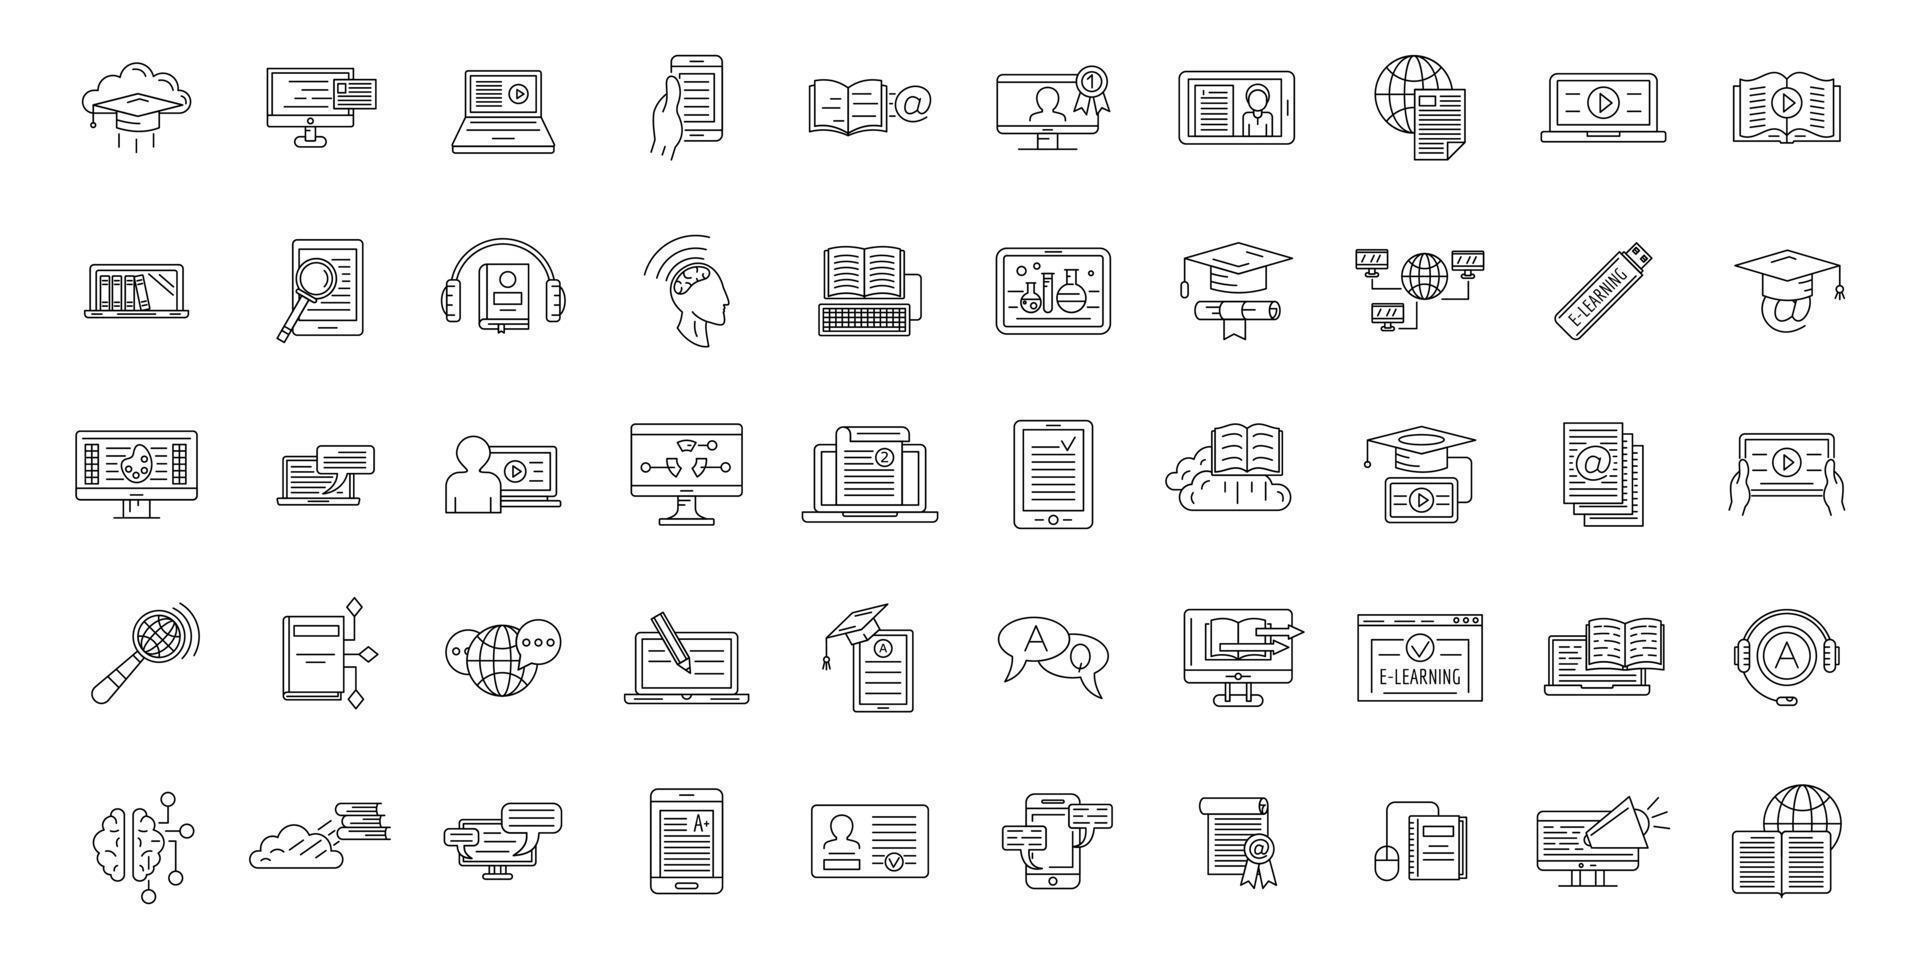 E-learning training icons set, outline style vector